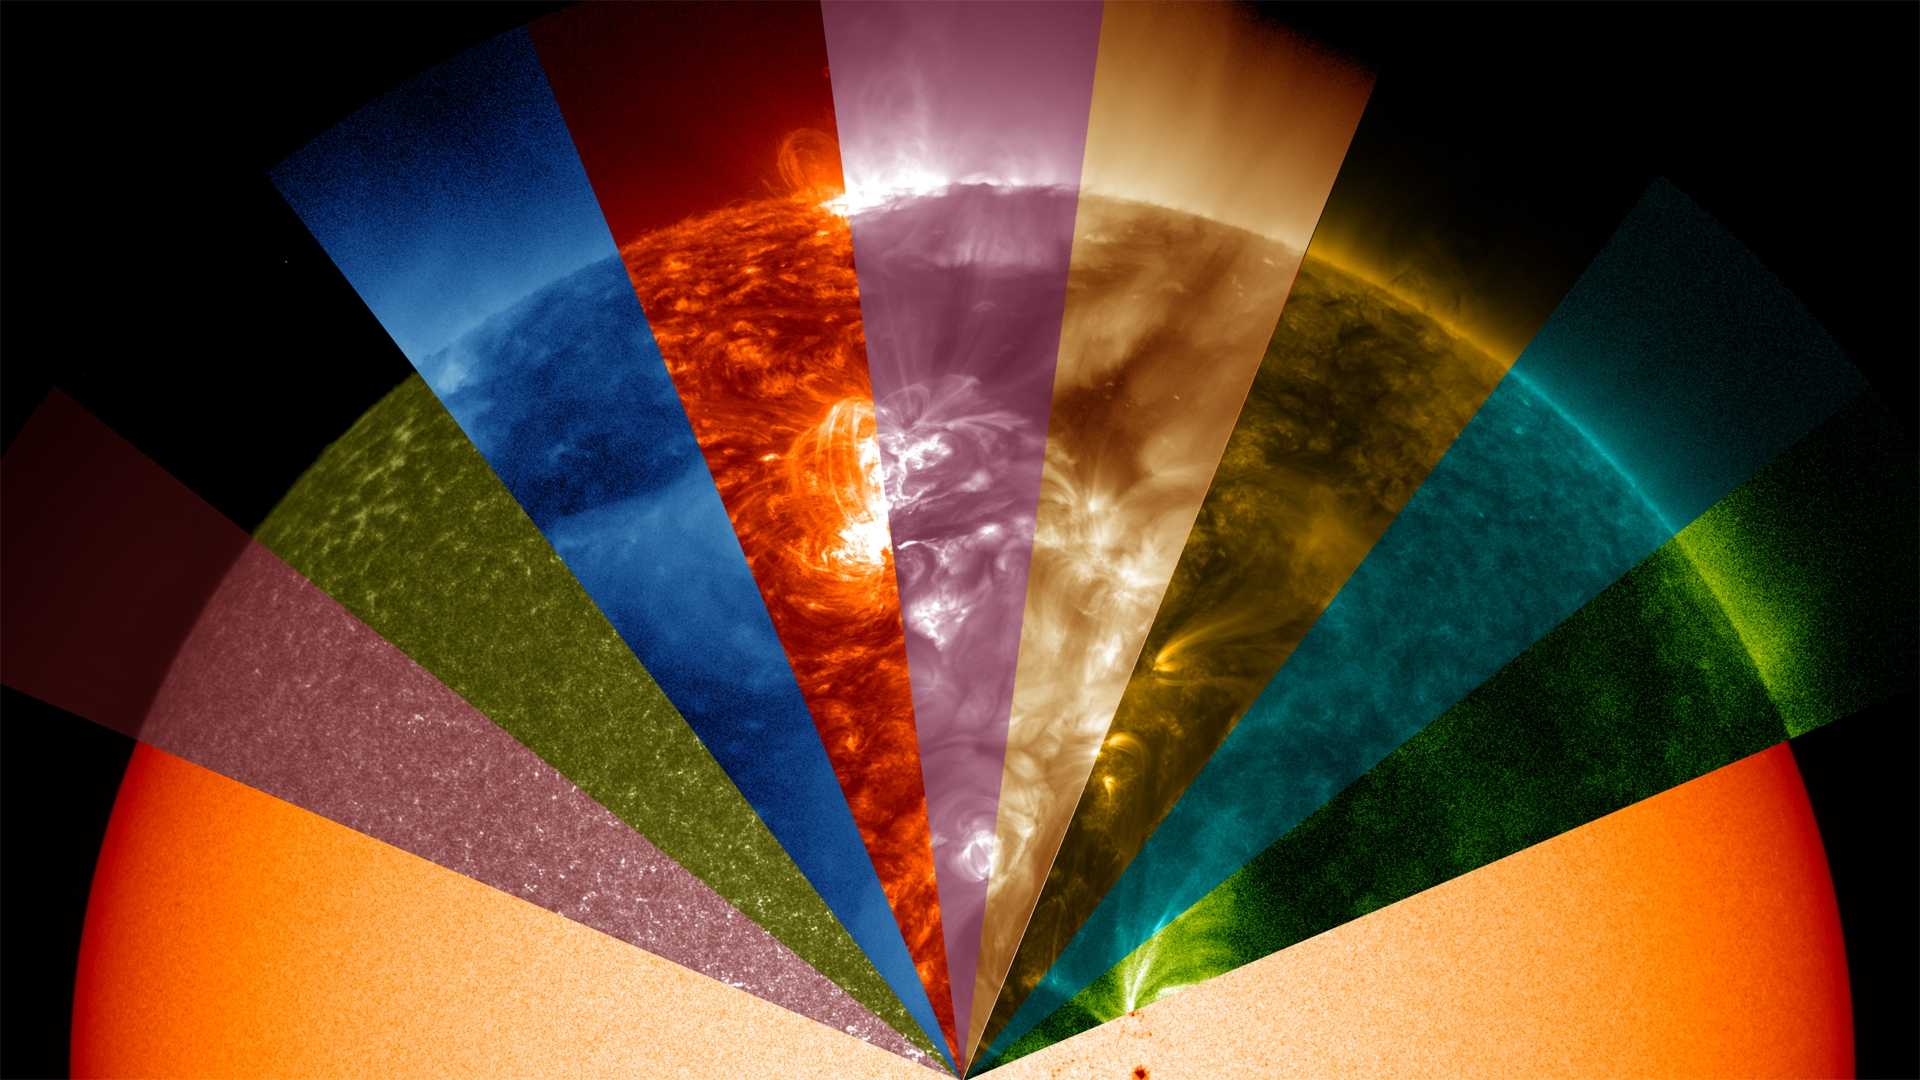 Scientists learn about the sun by watching it in different wavelengths of light.